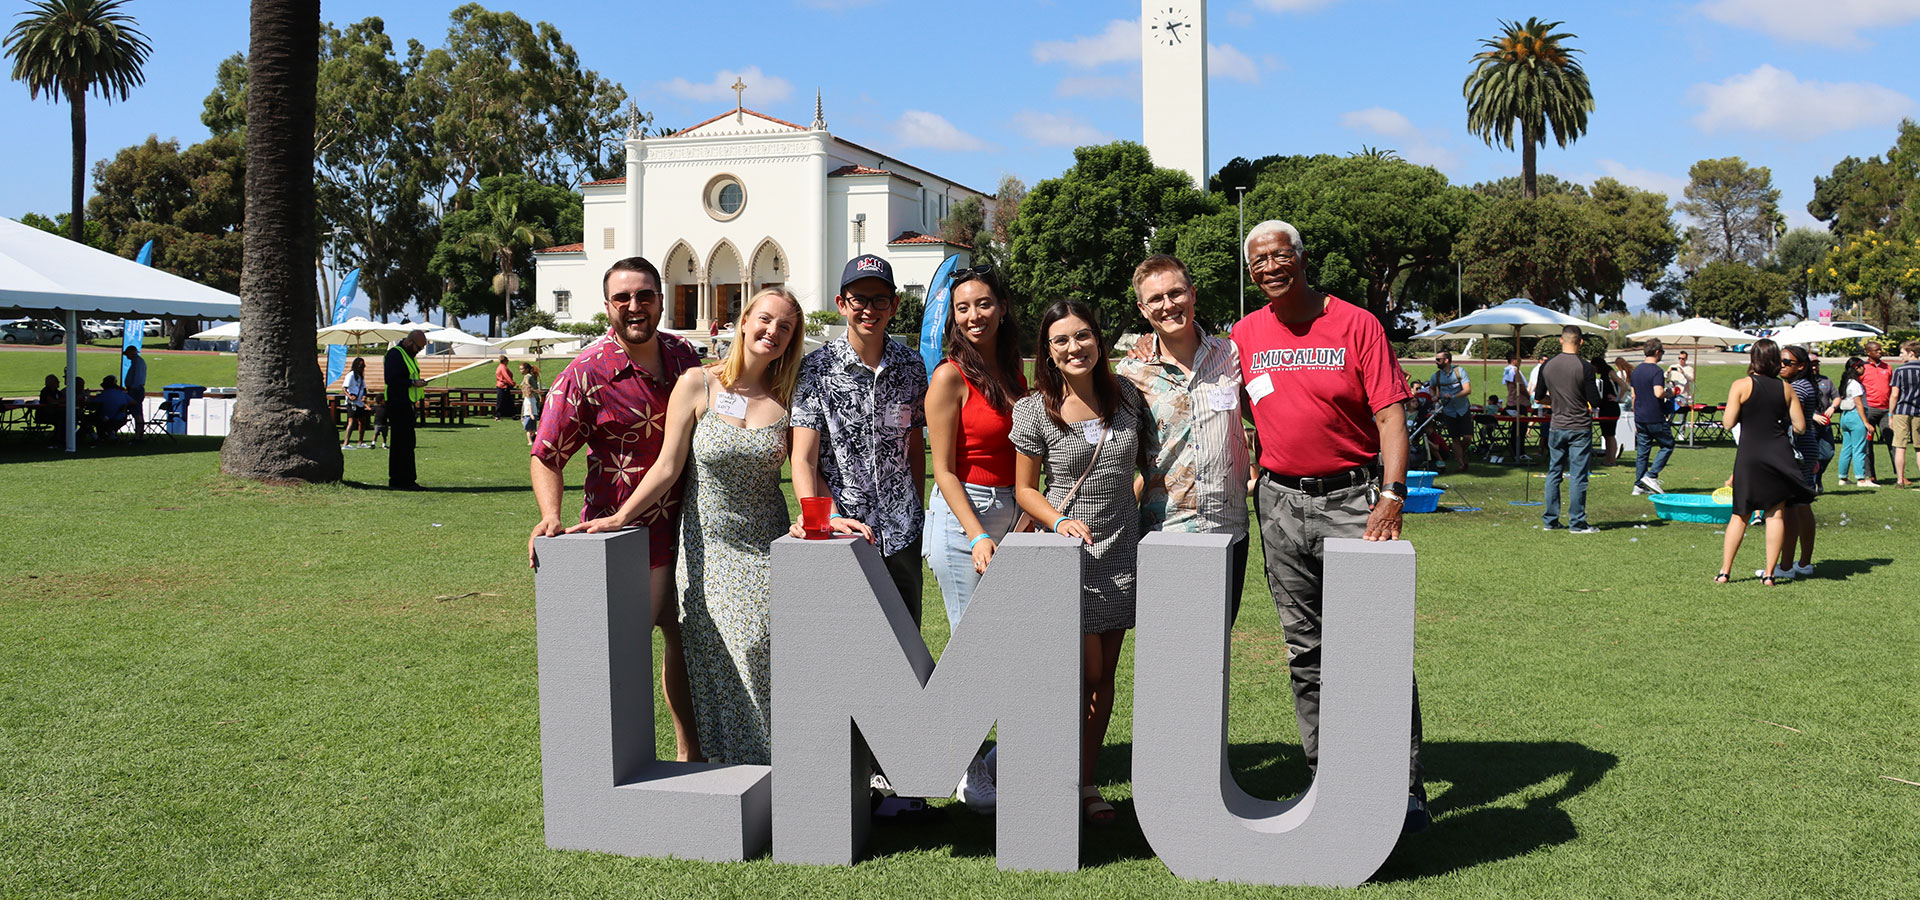 Several alumni standing behind large LMU block letters on Sunken Garden with Sacred Heart Chapel in the background